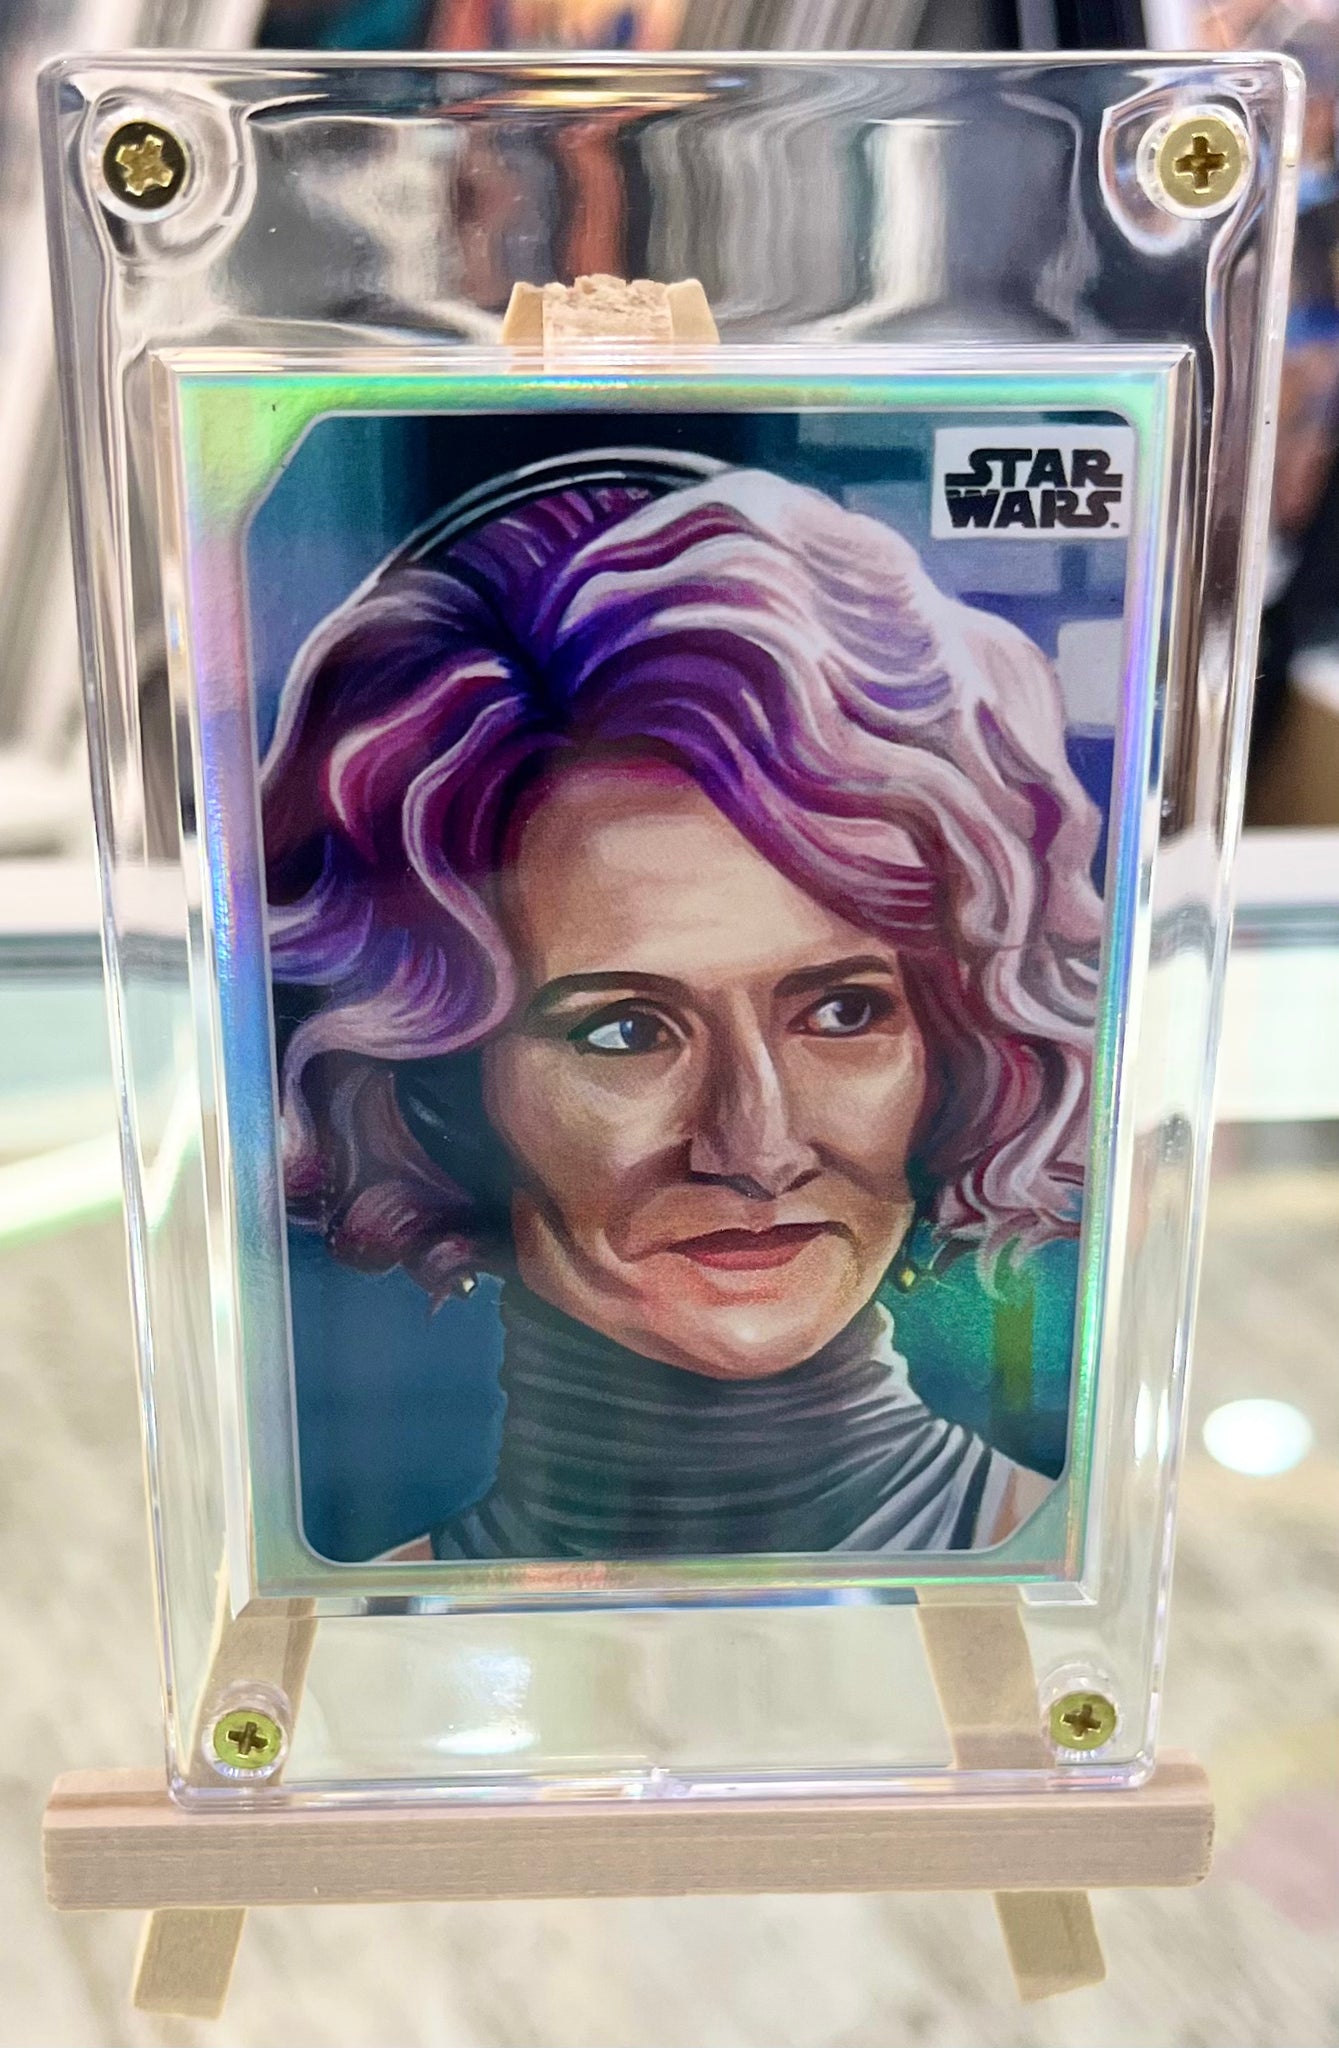 Star Wars Celebration 2023 Exclusive Topps Base Collector Cards - Volume 3 Sequel Trilogy